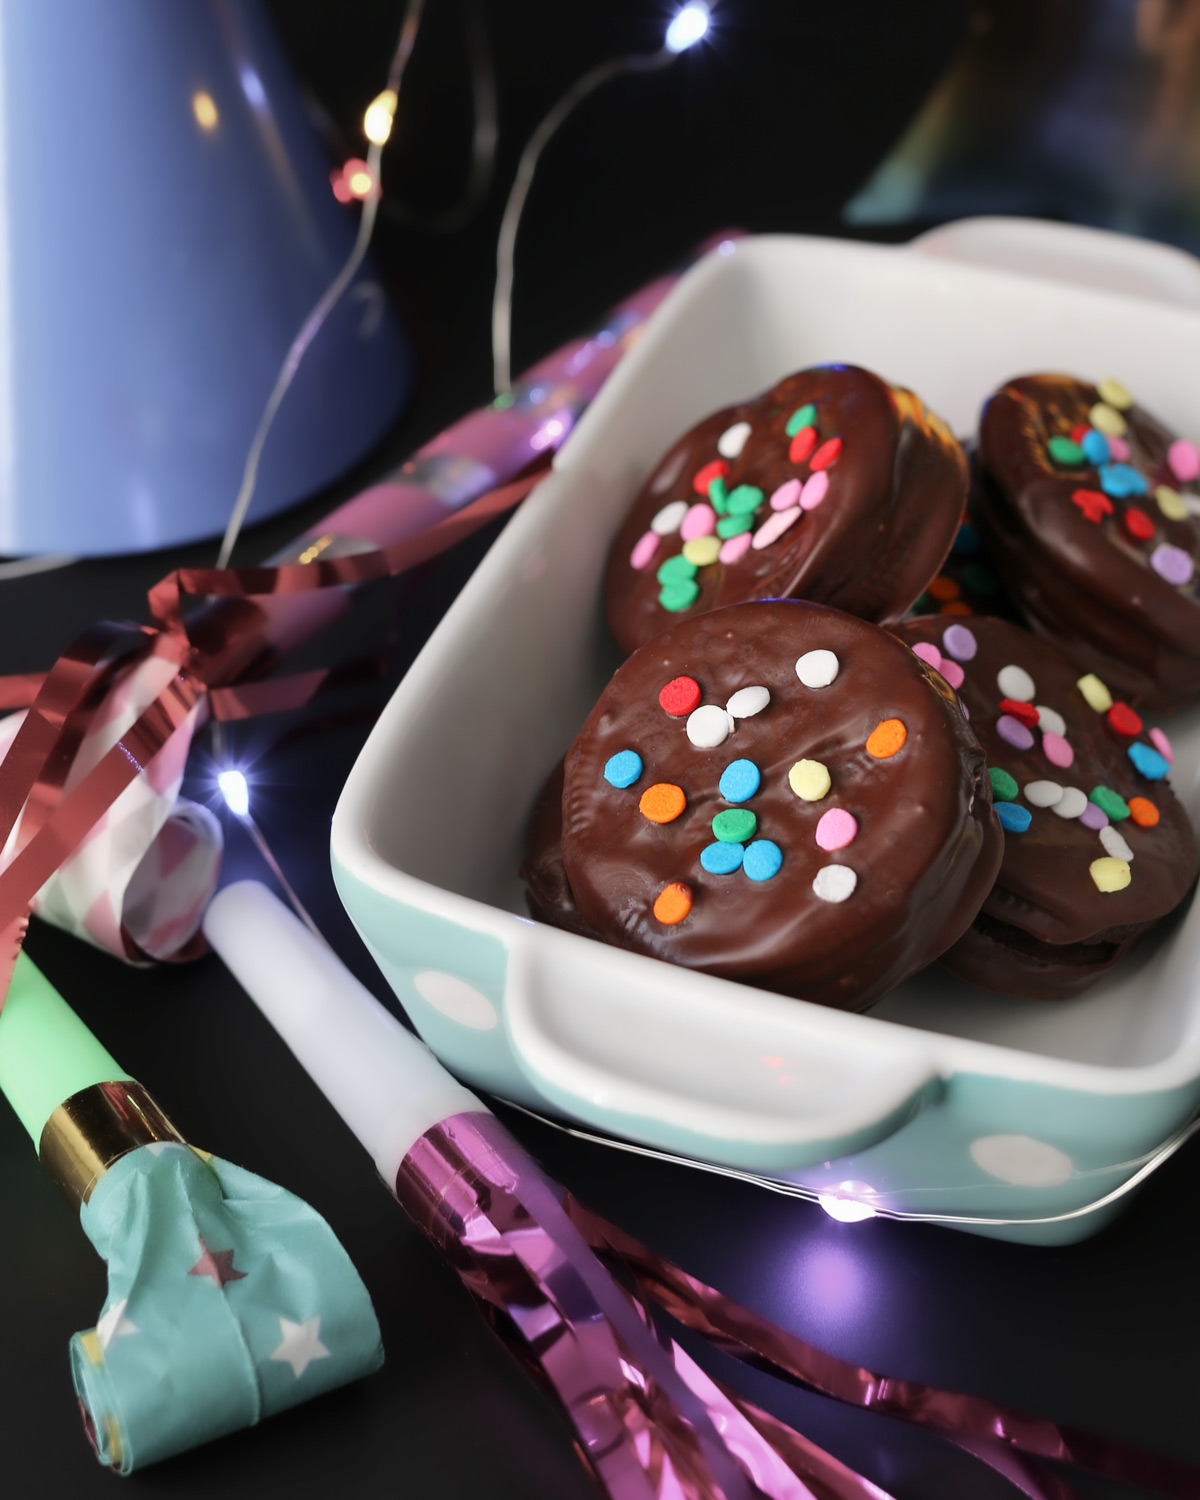 new year's themed chocolate dipped oreos in a blue dish.